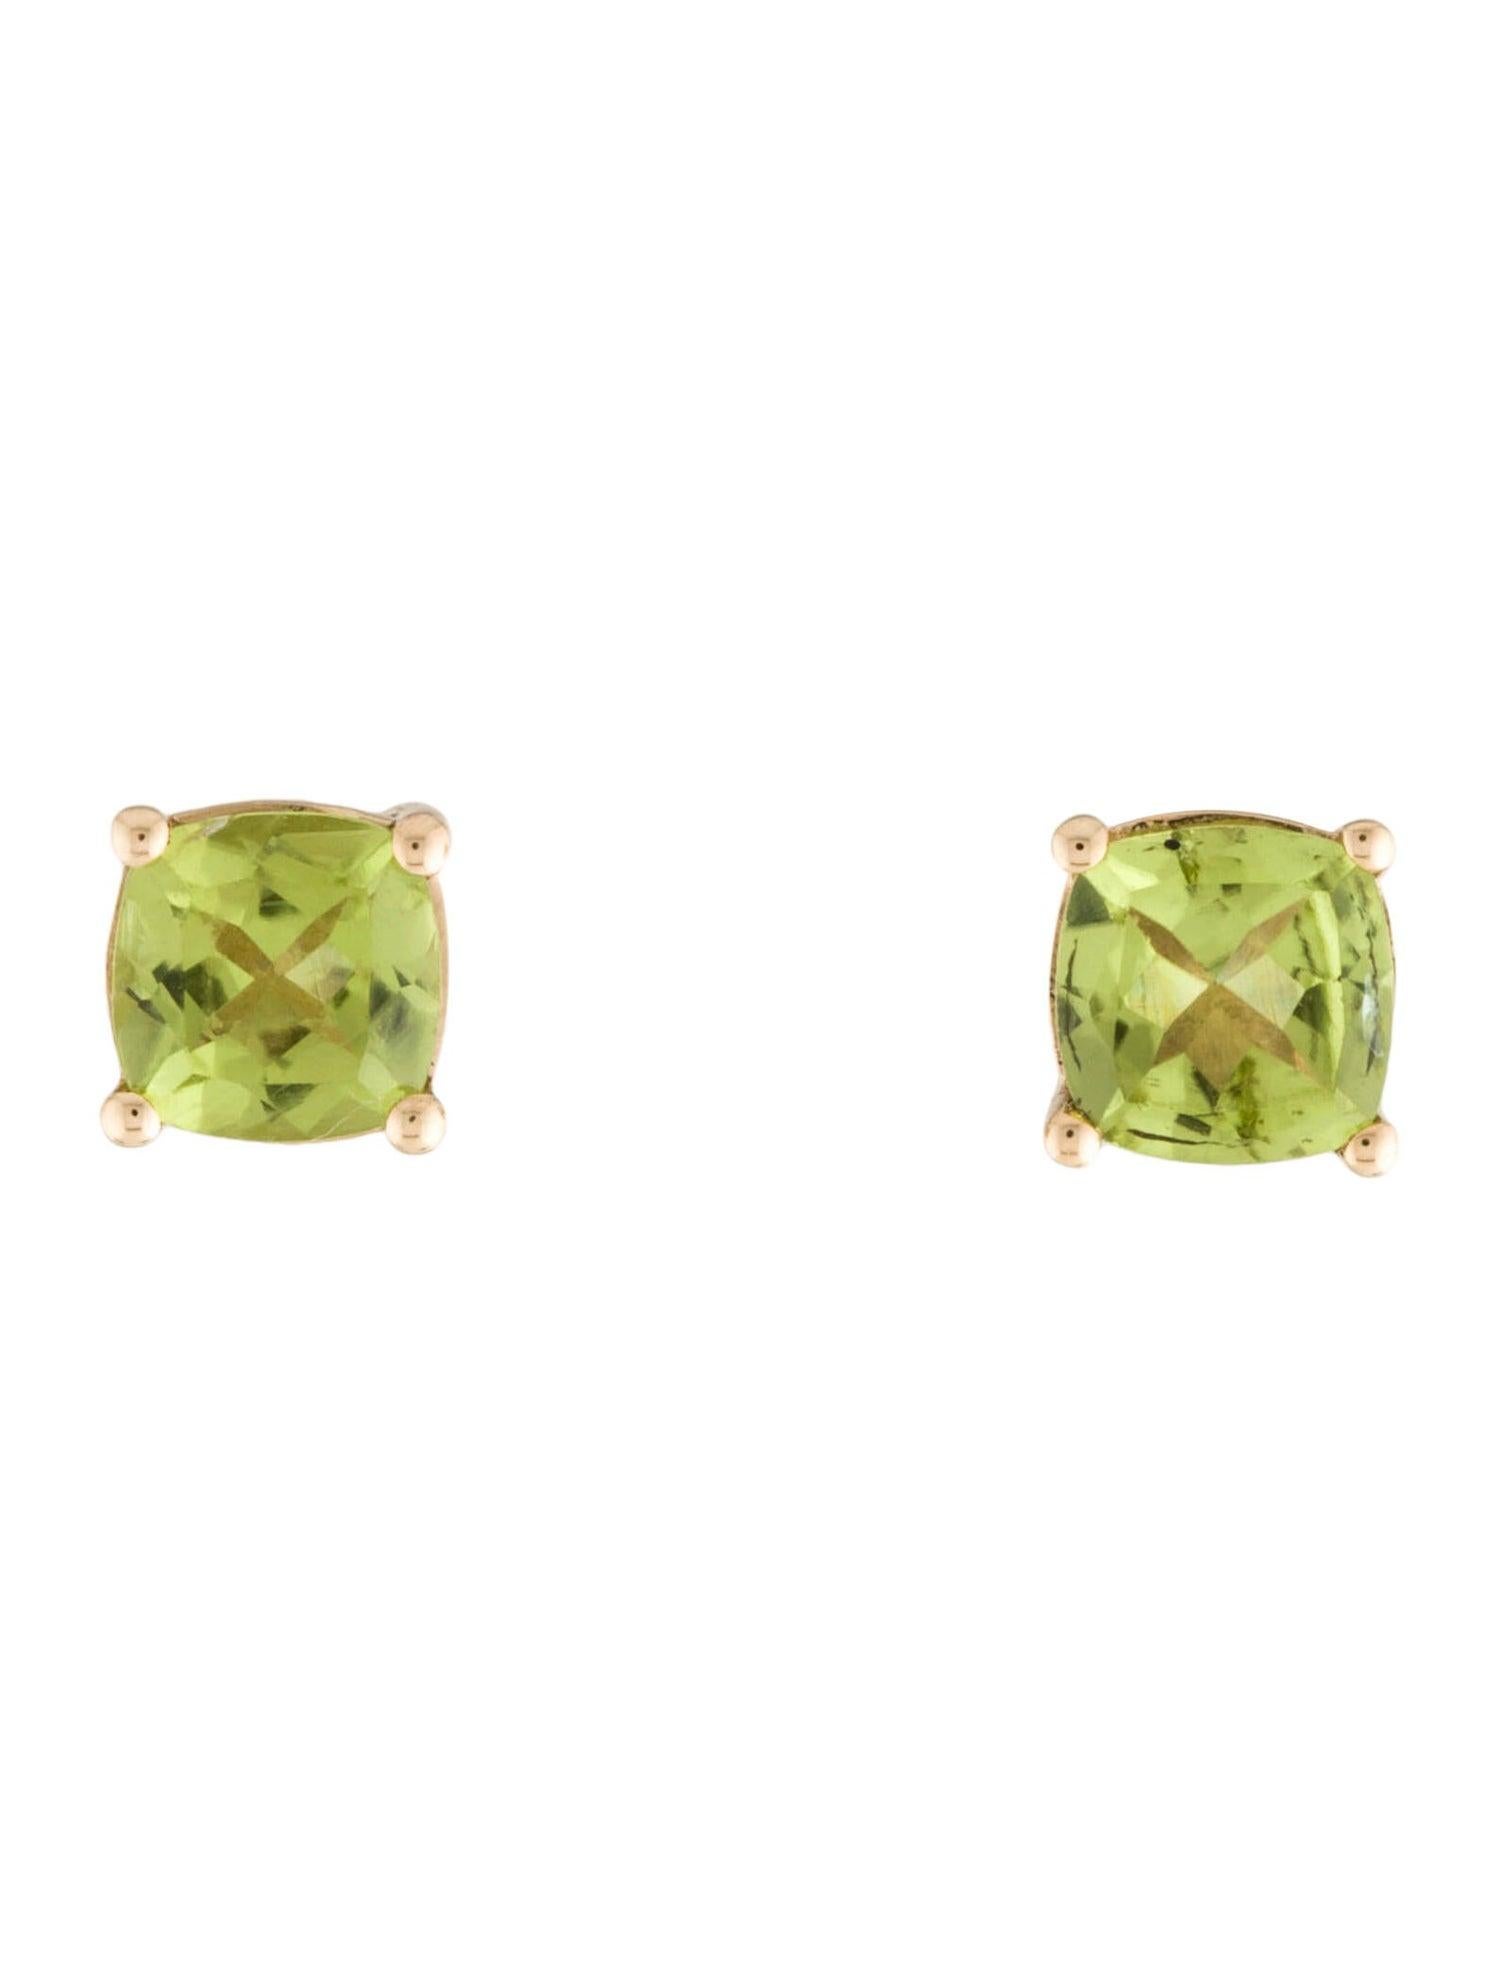 Elevate your style with our exquisite Harmony in Green Peridot Earrings, a testament to nature's harmonious beauty. Handcrafted with precision in India by our skilled artisans, these earrings embody the essence of serenity and balance.

Made with